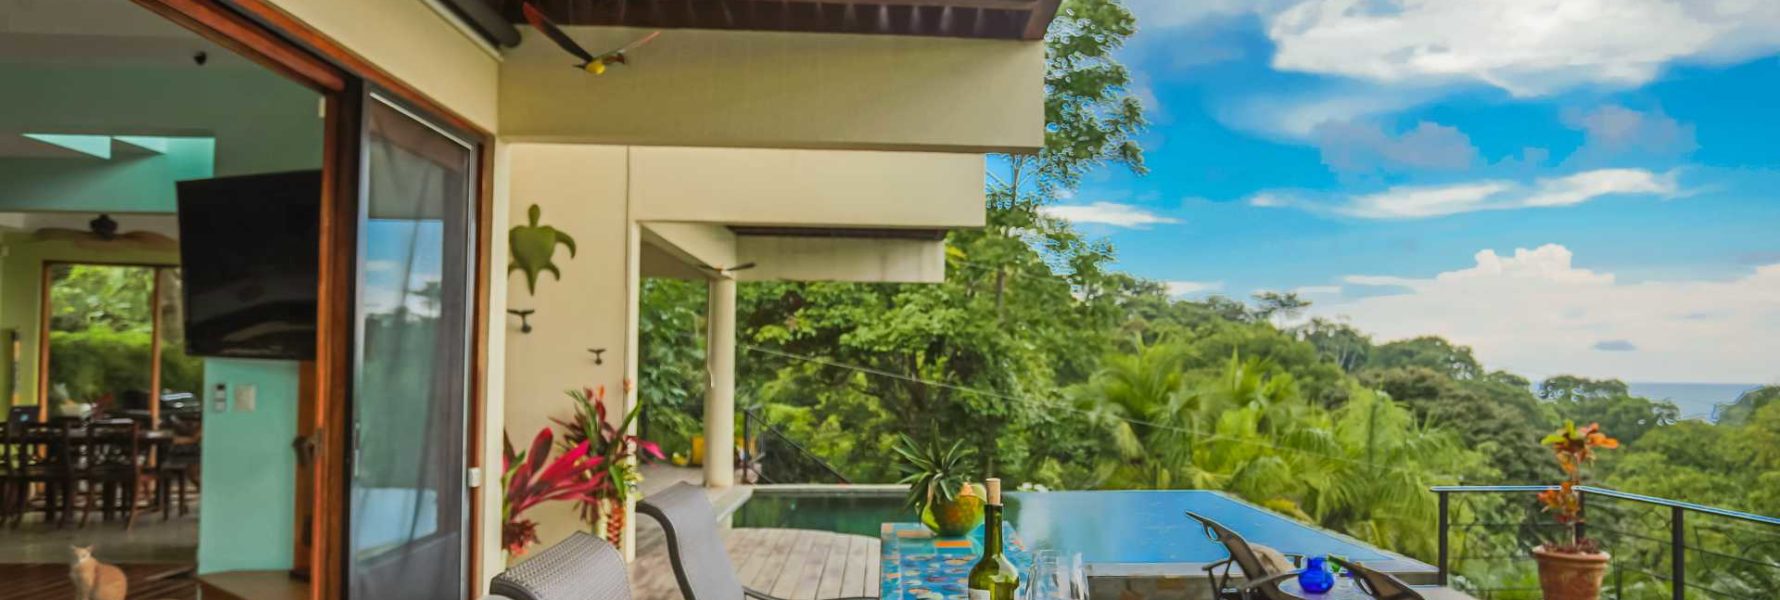 Sit outside at this custom breakfast bar and enjoy a classic Costa Rican meal, Right in front of the pool. 